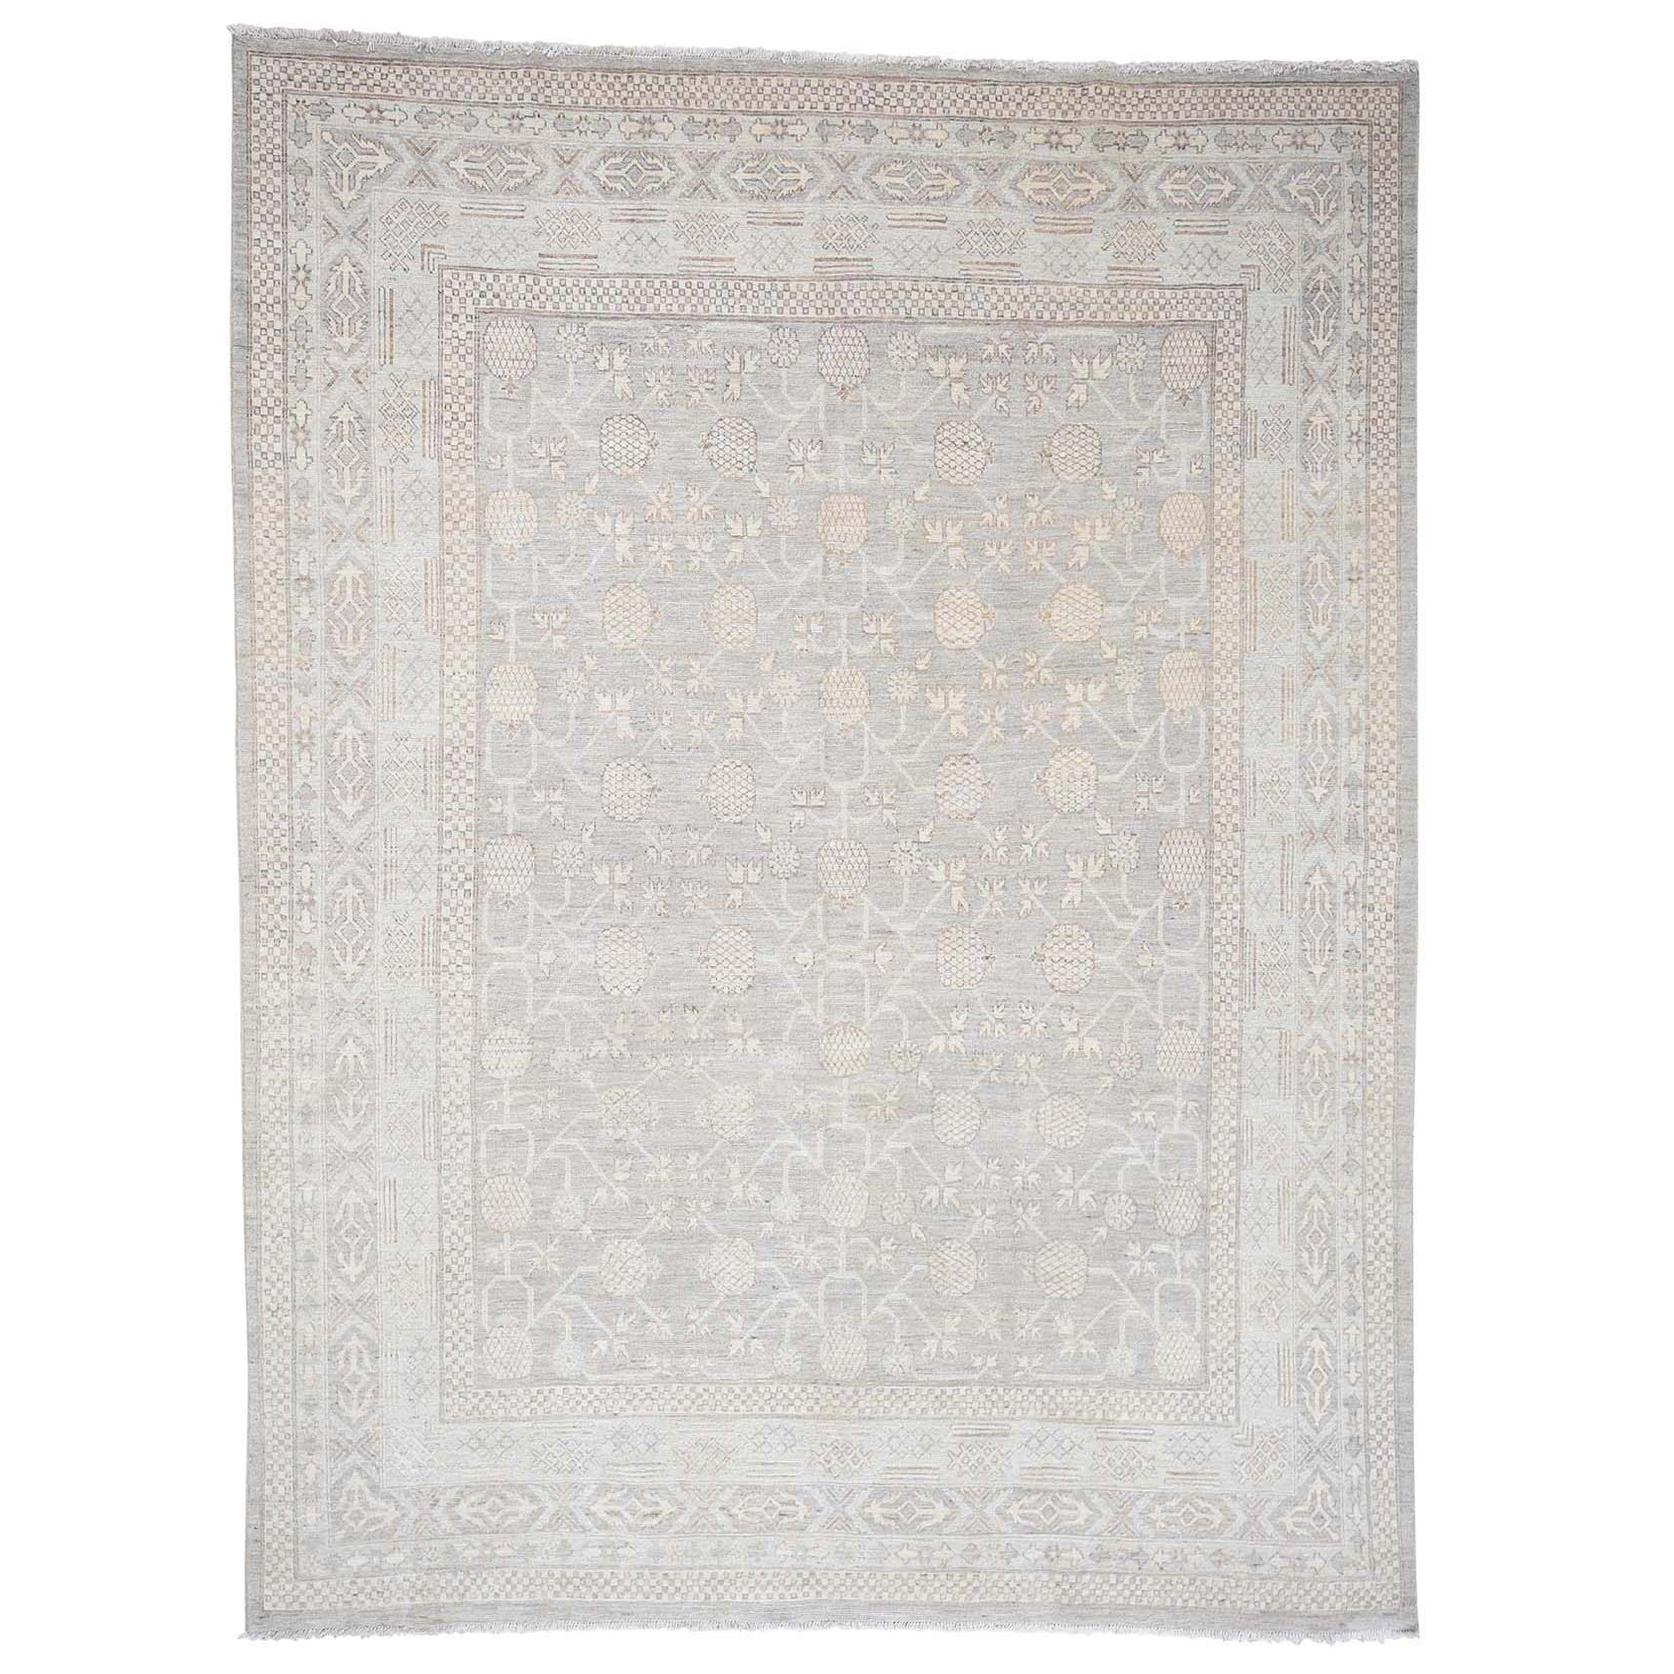 Khotan with Pomegranate Design Silver Wash Hand Knotted Oriental Rug